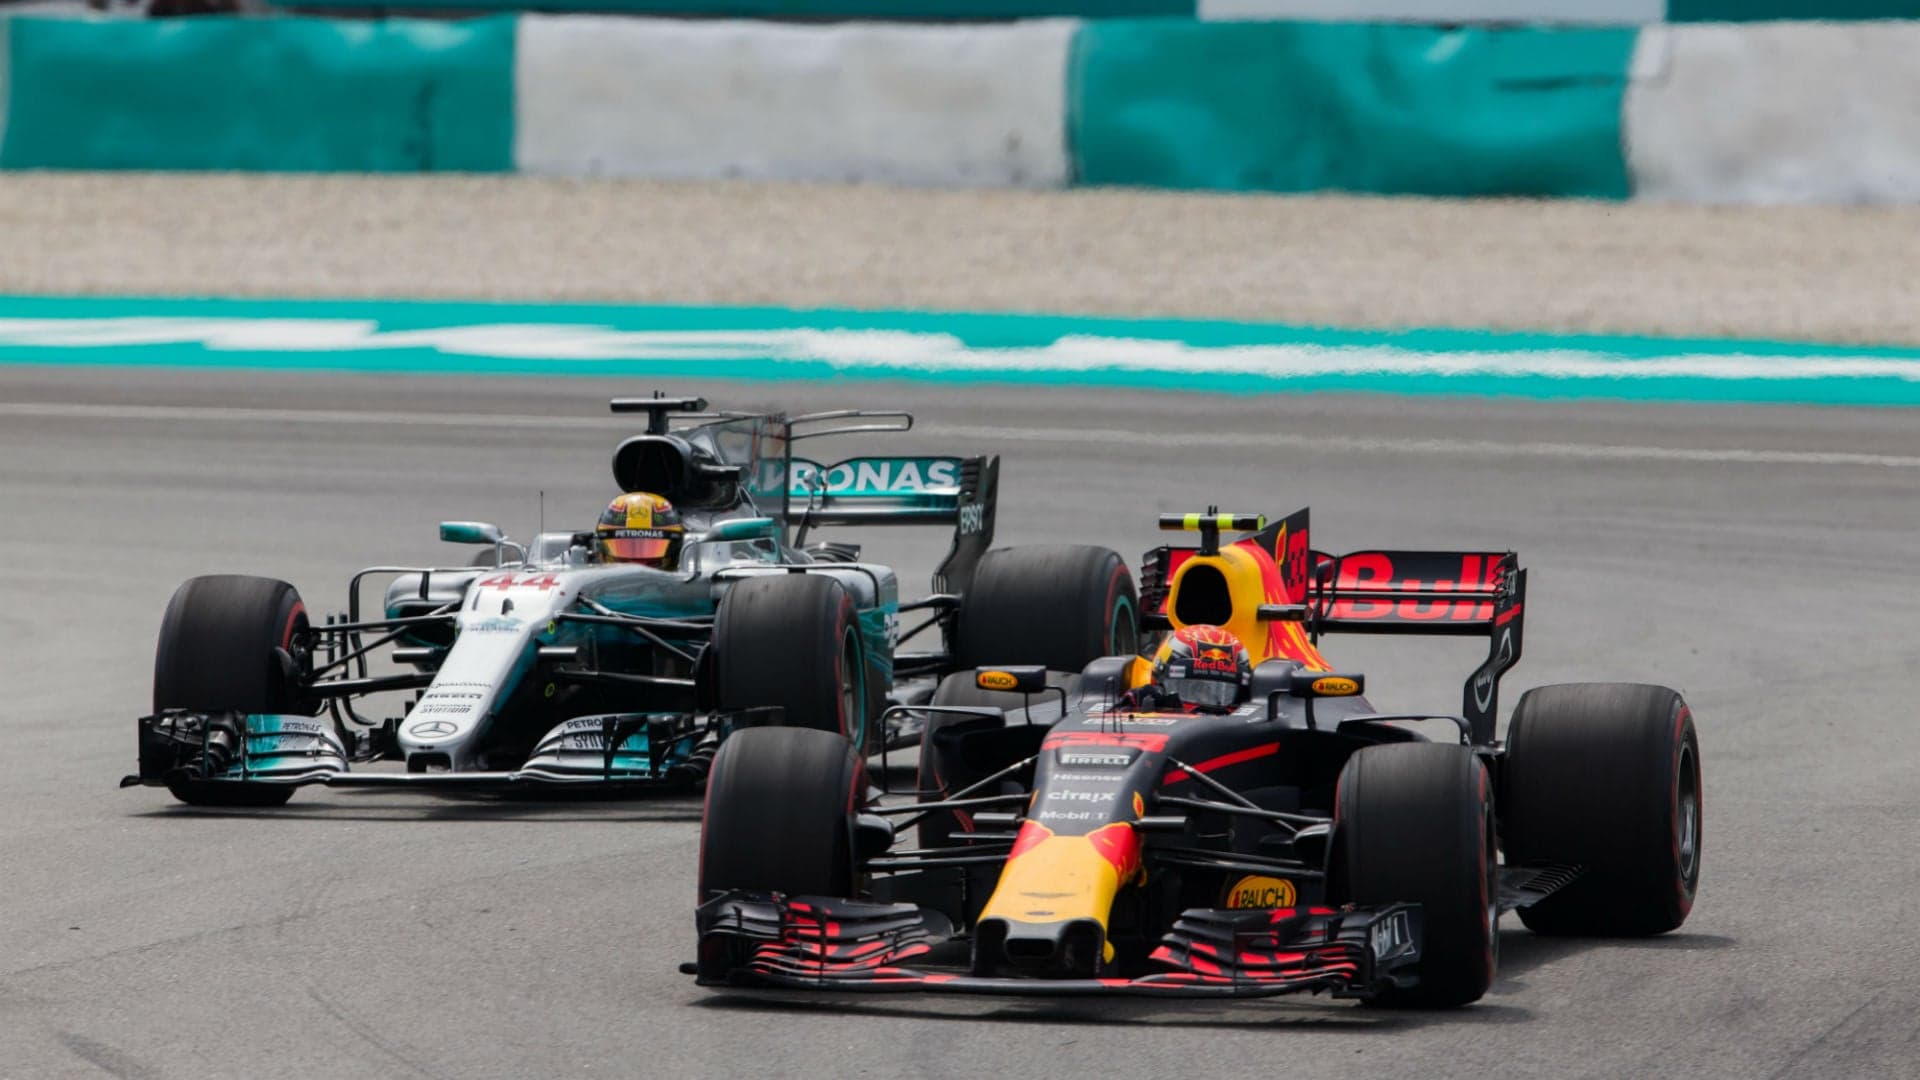 With the Championship Decided, Who Will Win the Brazilian Grand Prix?